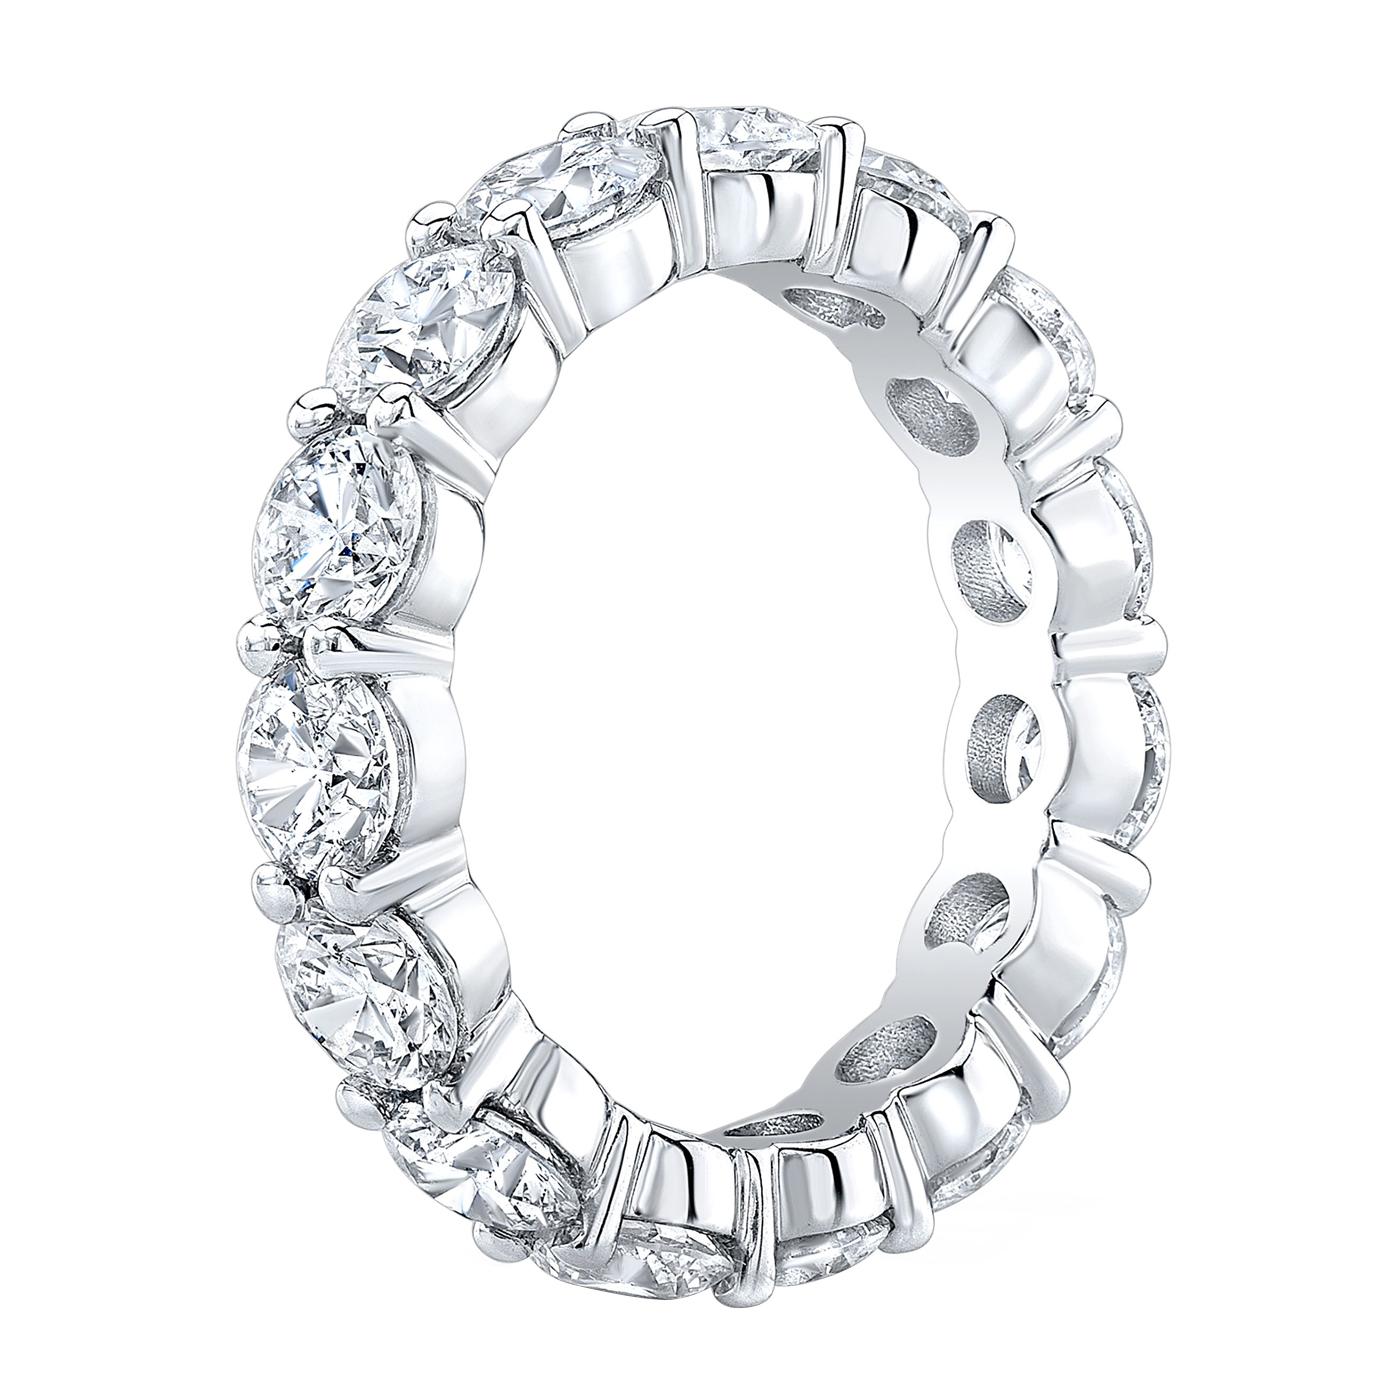 Modernist 2.5ct 18 Natural Round Diamond Eternity Band Wedding Ring Platinum VS1 Clarity For Sale